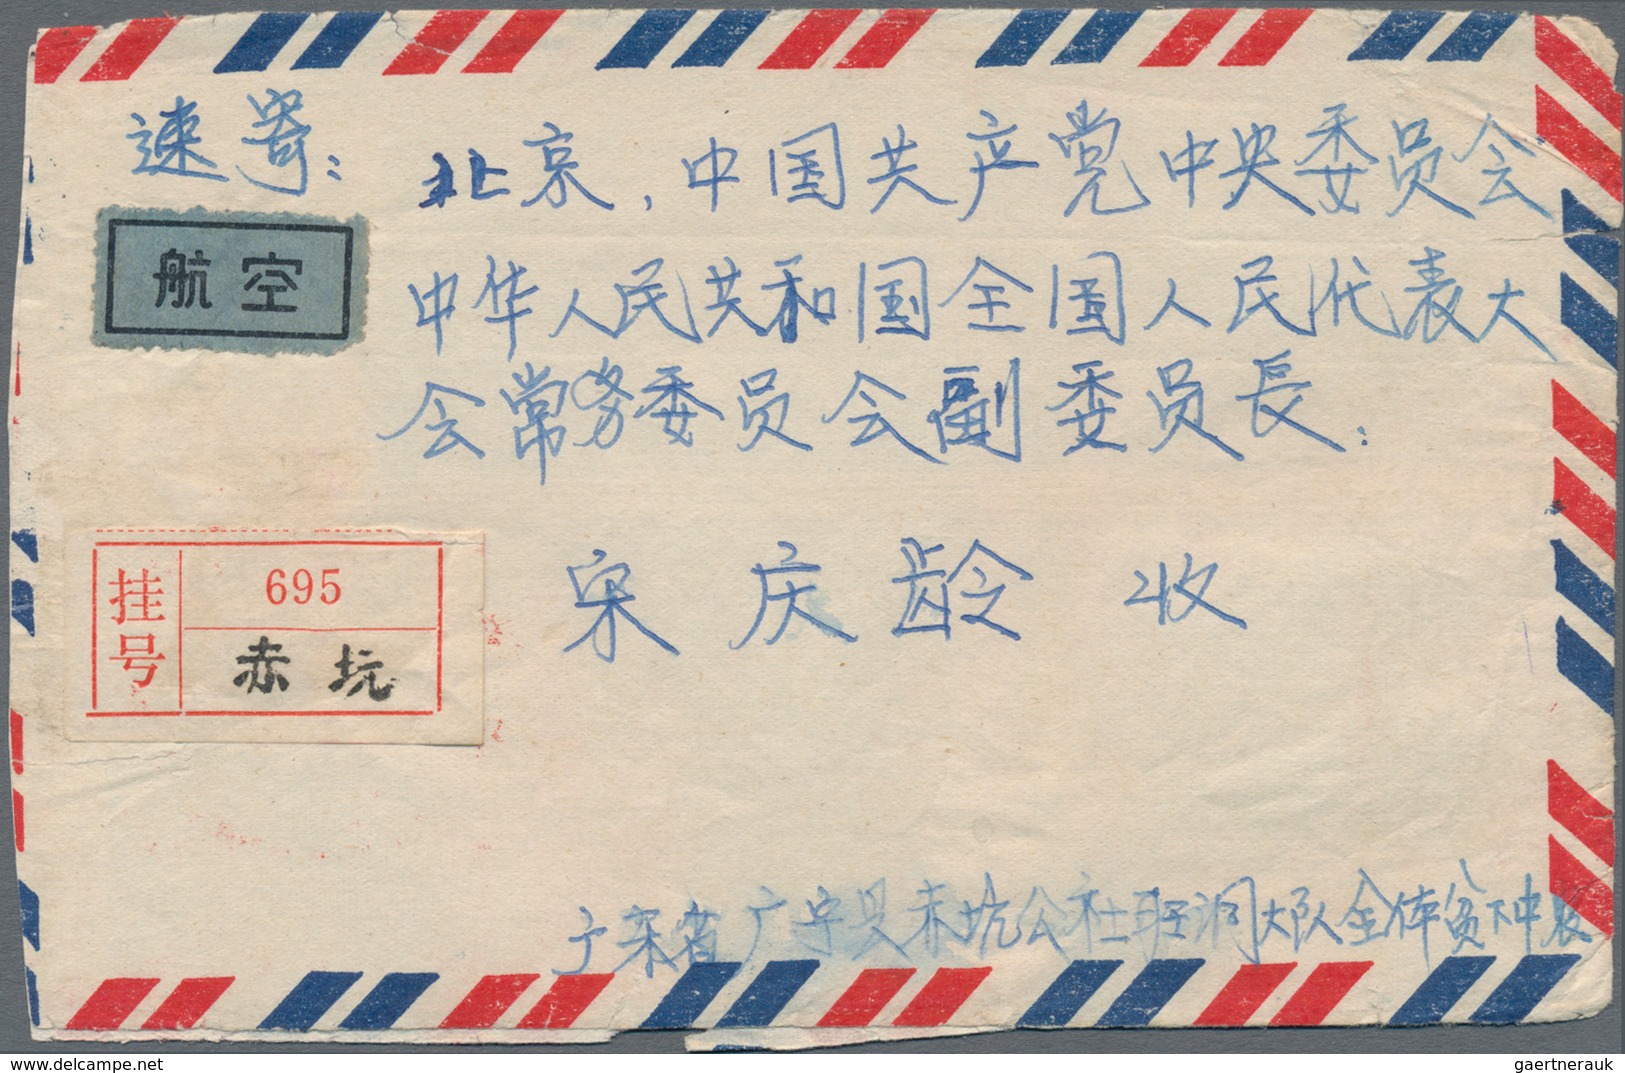 China - Volksrepublik: 1951/95, approx. 39 covers all addressed to important figures of the PRC gove